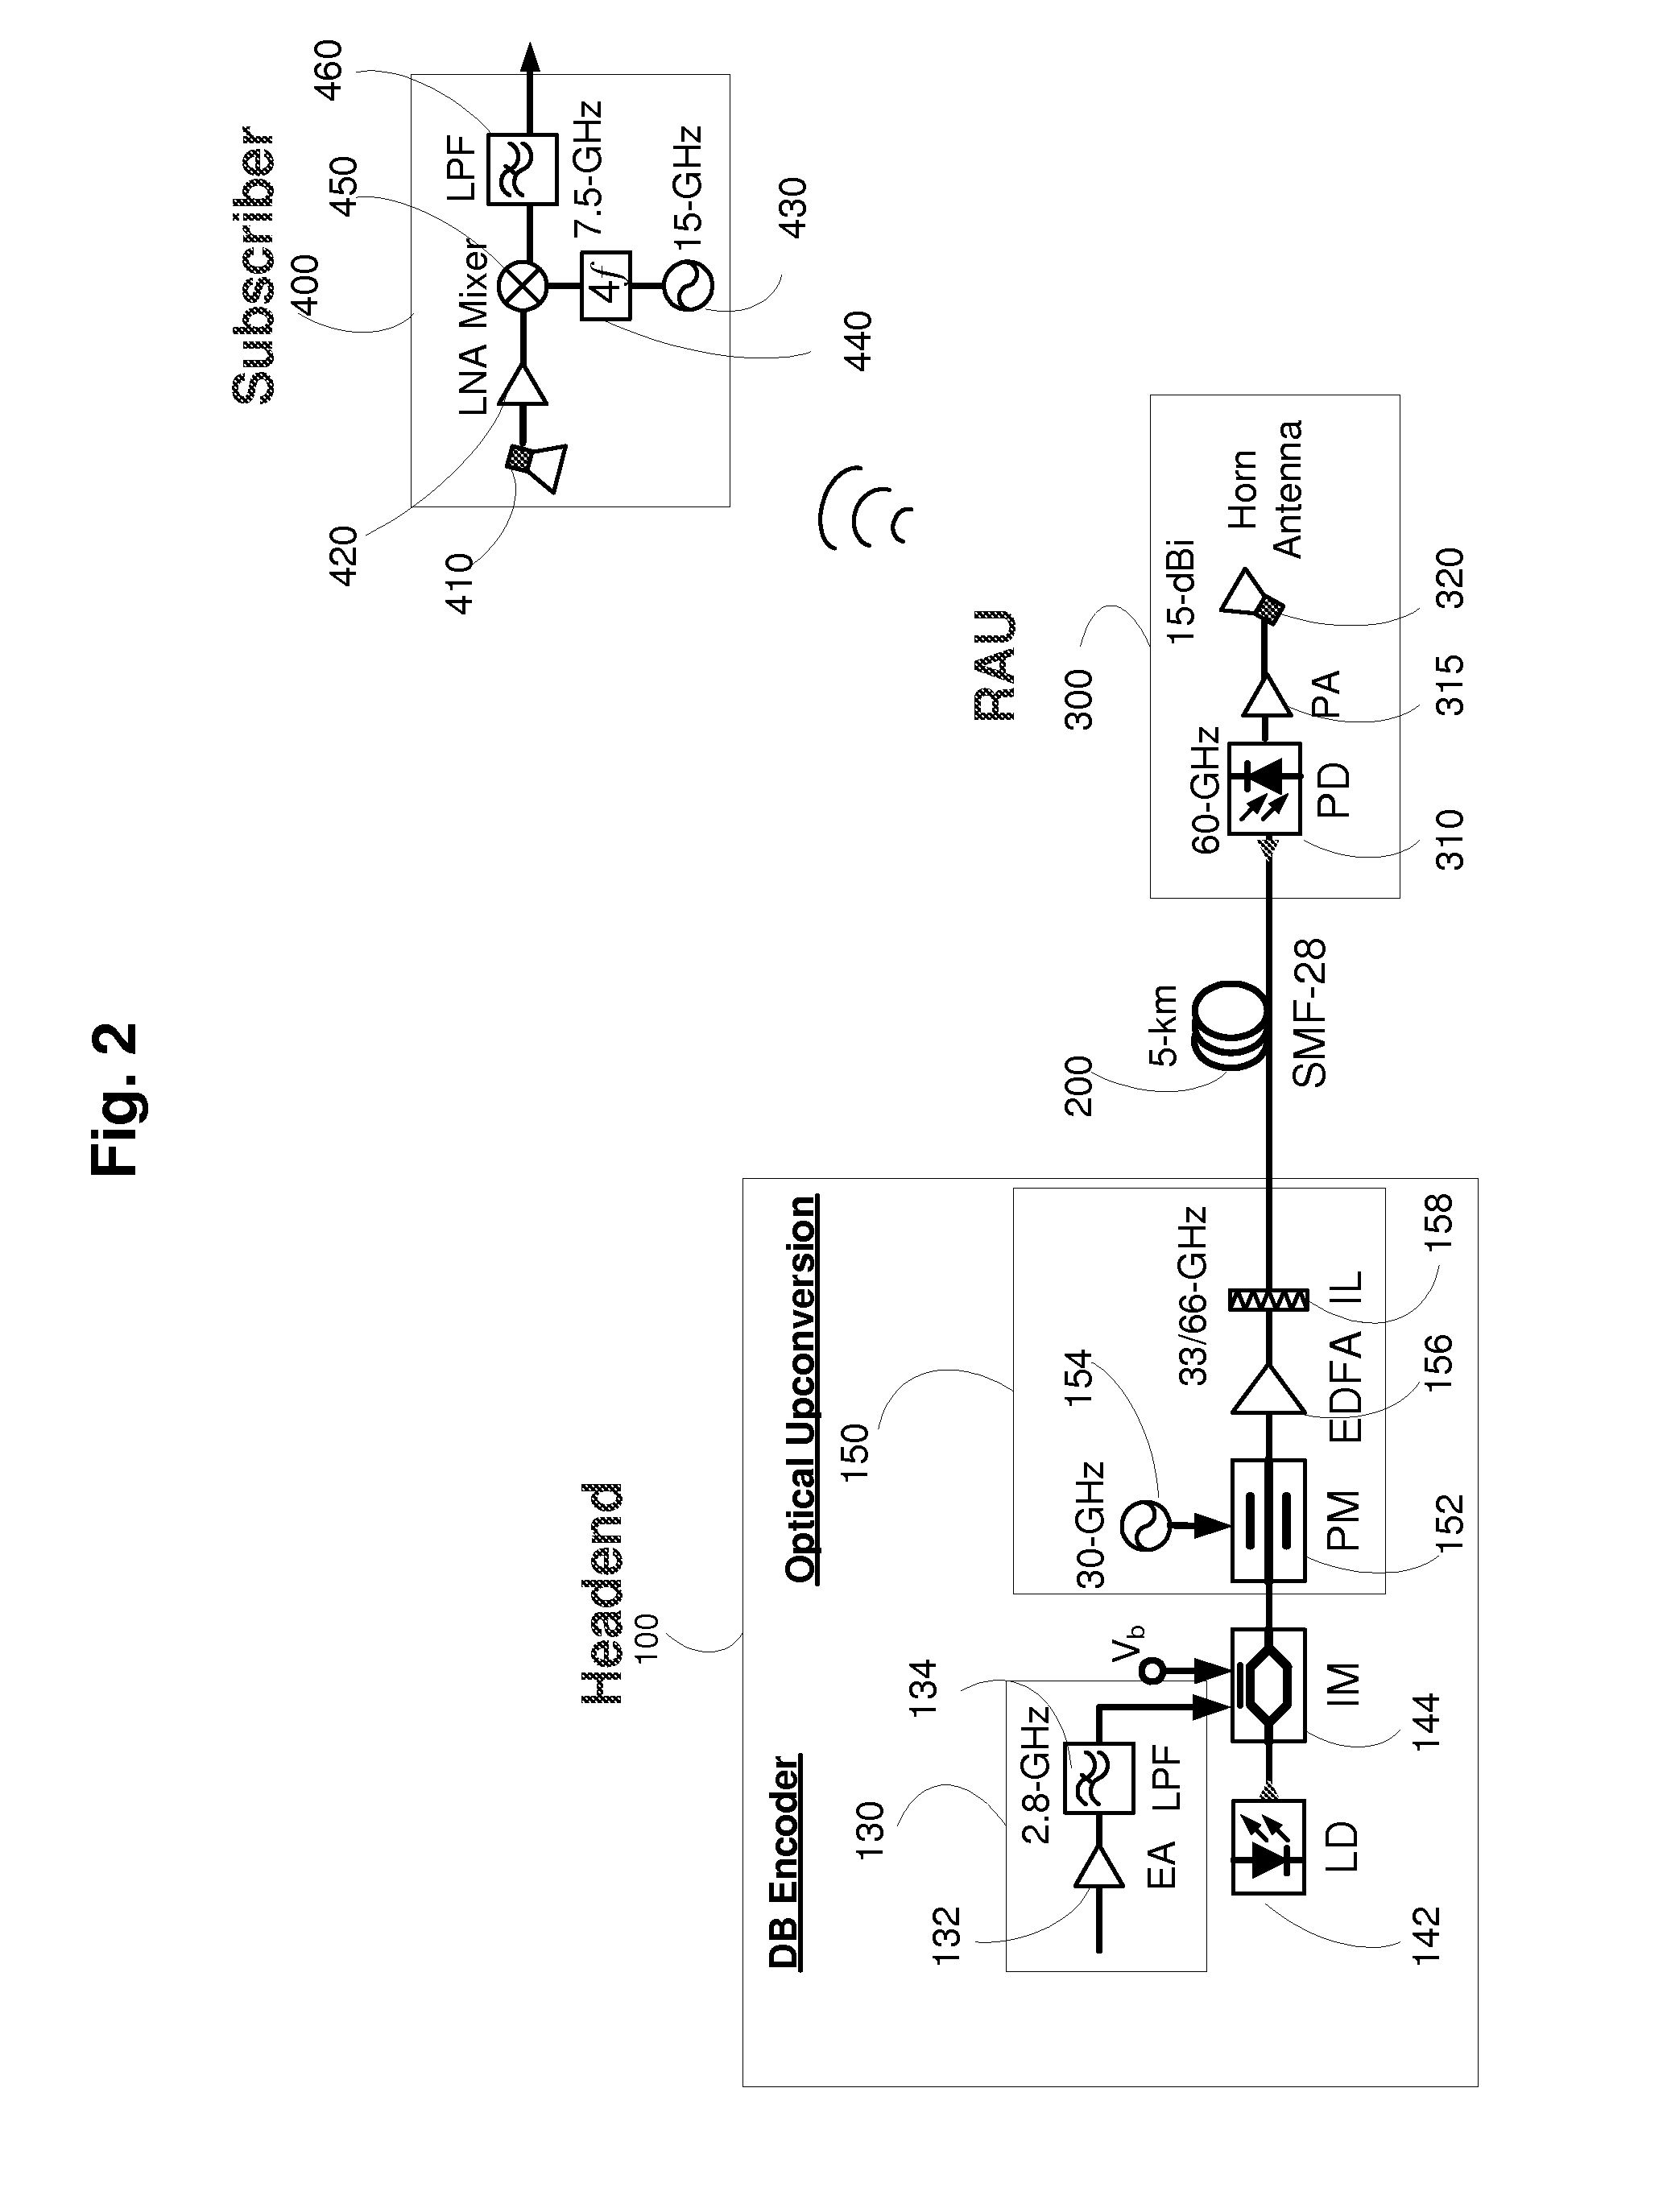 Systems and methods for providing an optical information transmission system